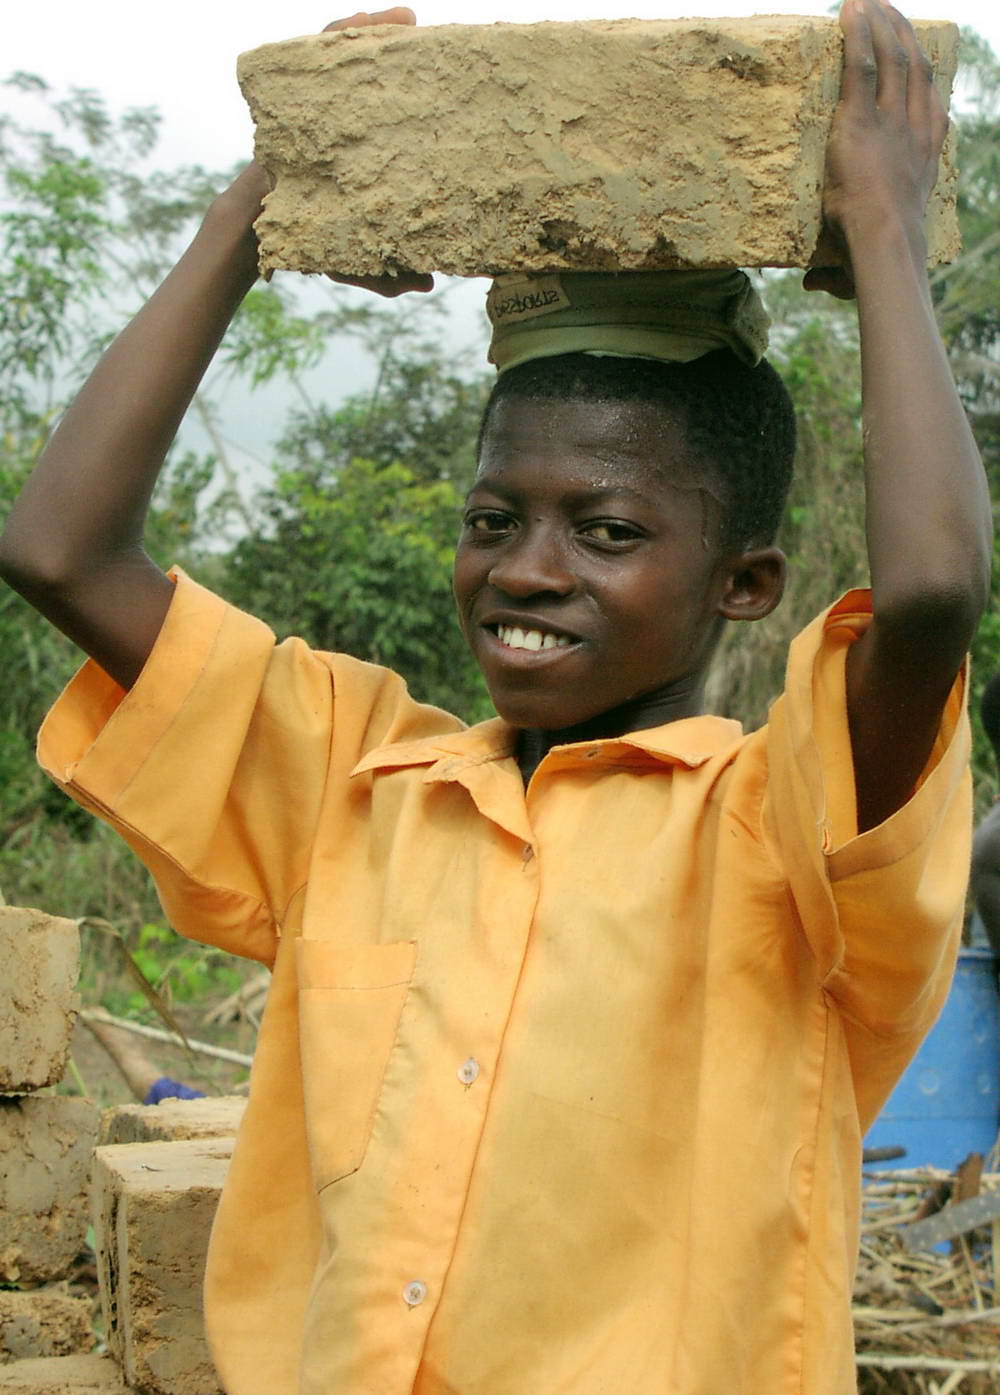 Smiling boy carrying block on his head